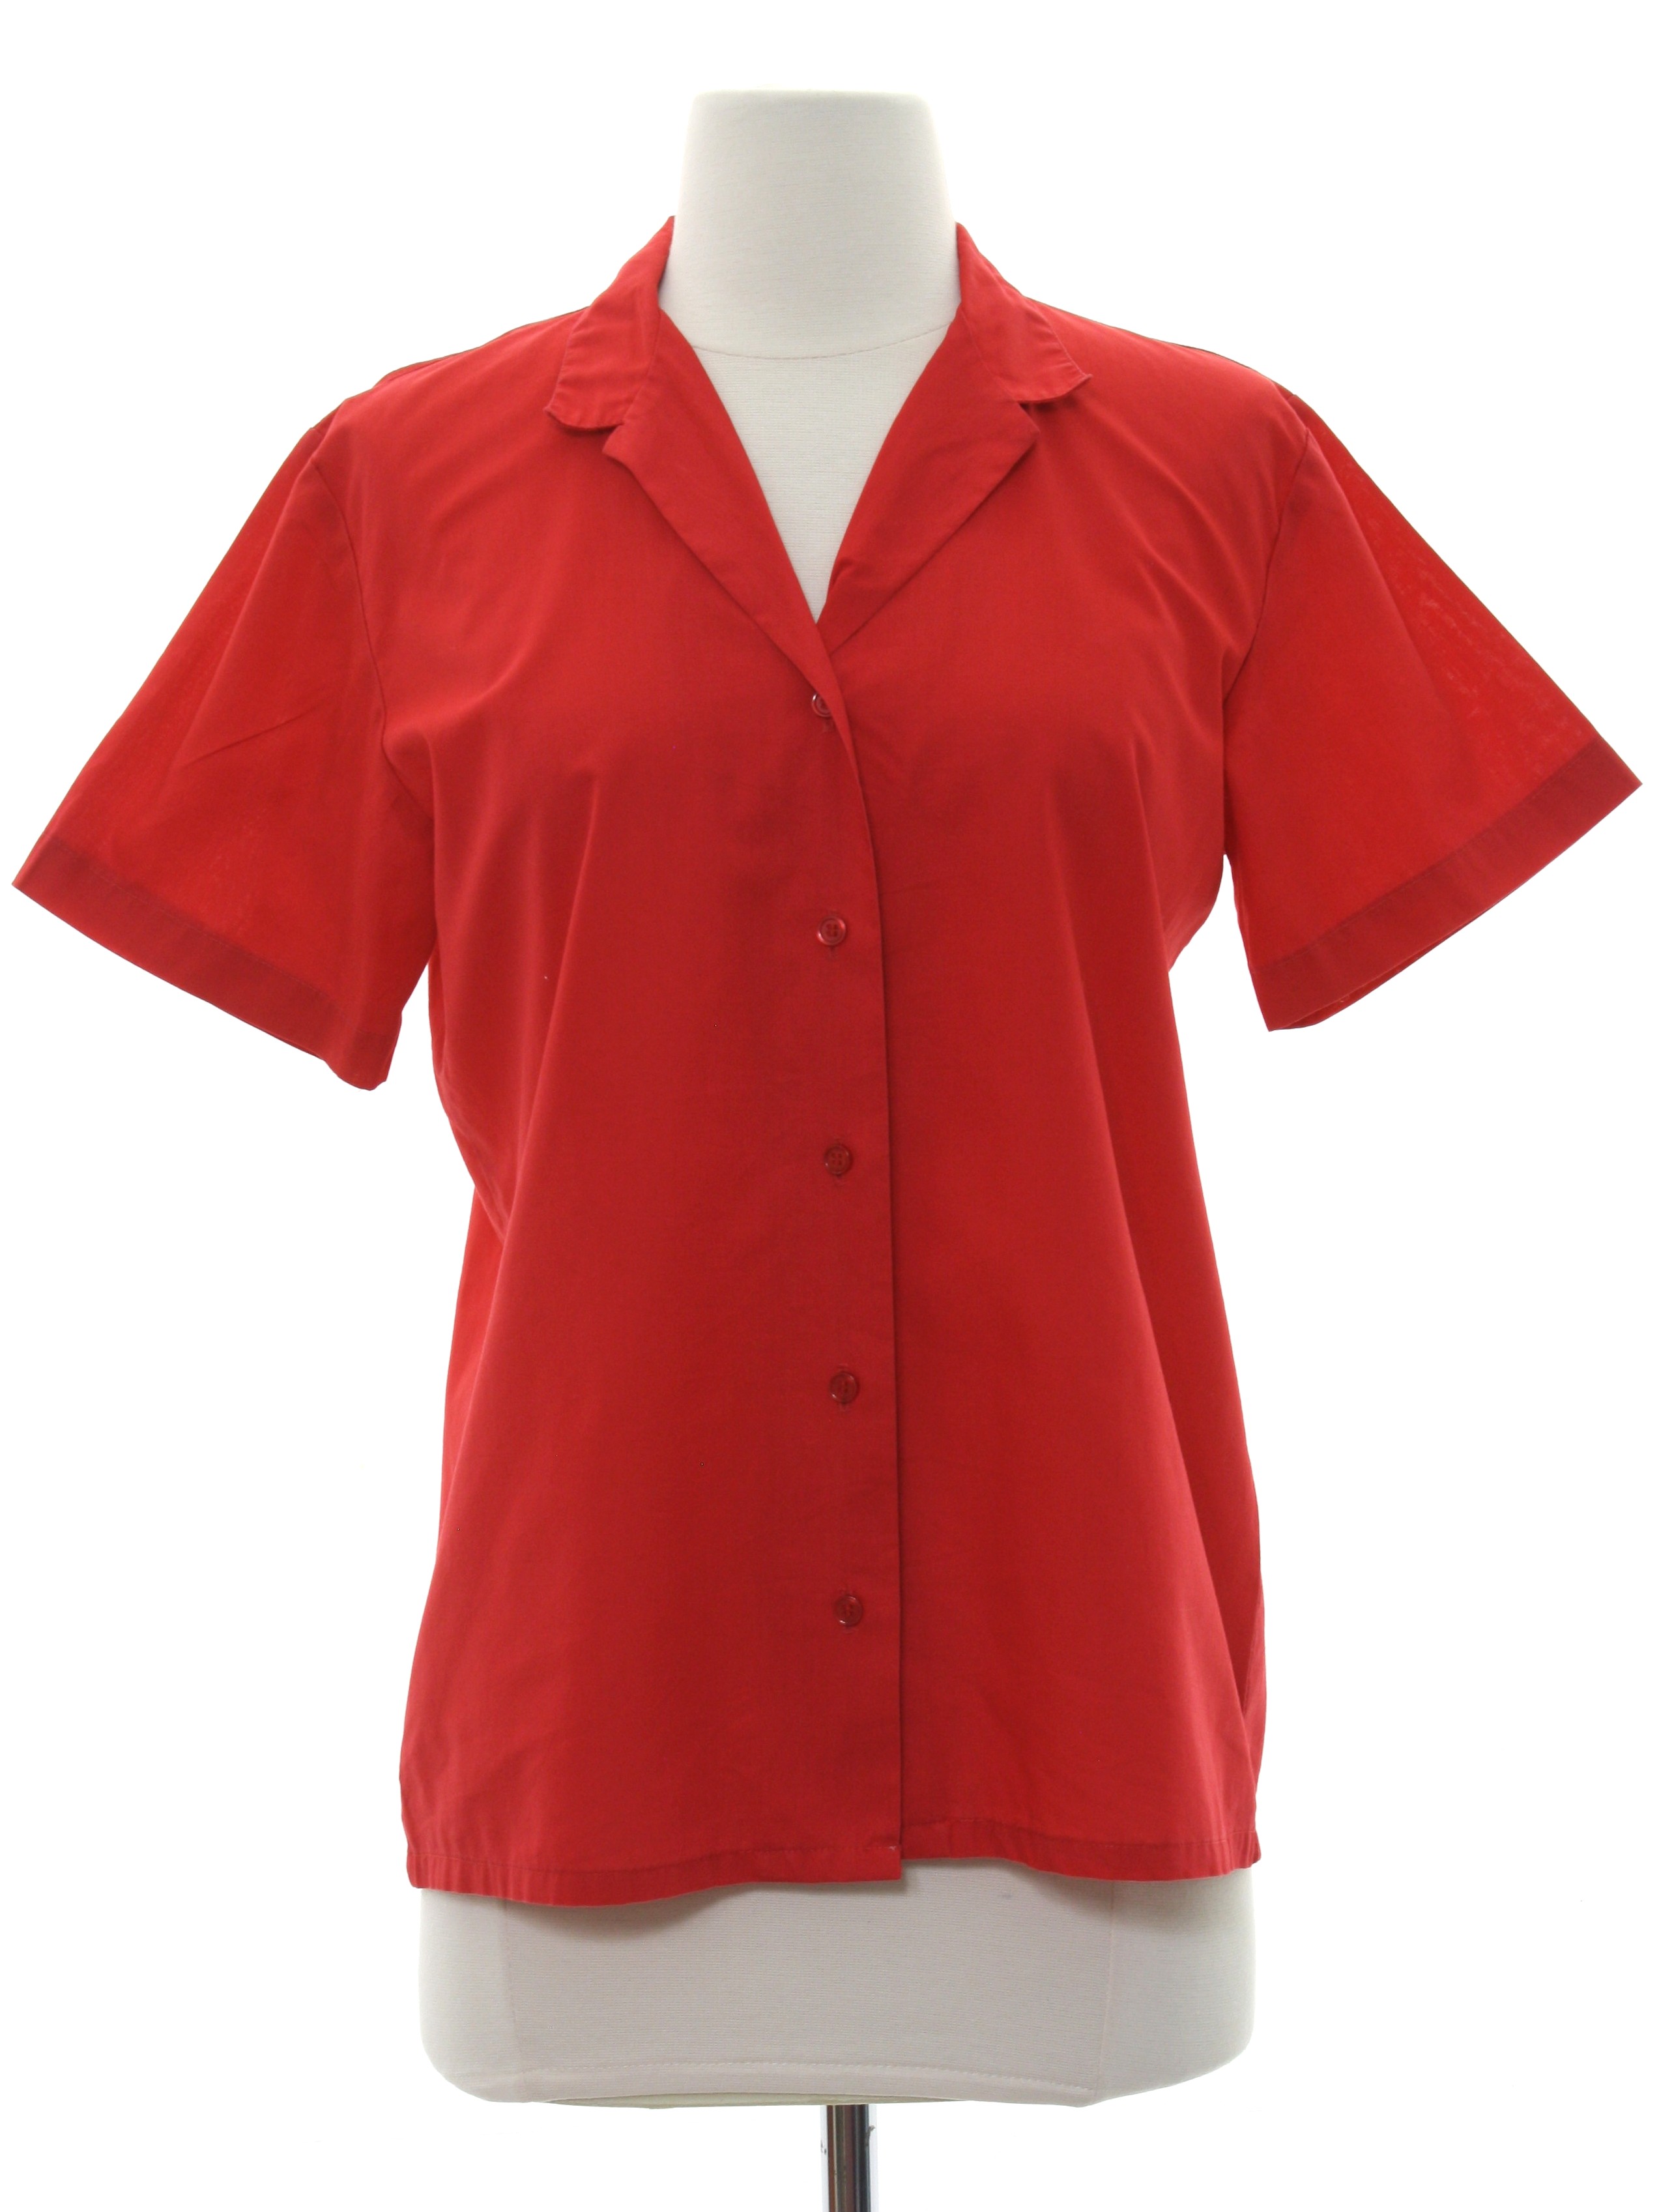 Vintage 80s Shirt: 80s -Classic Fashions- Womens red polyester cotton ...